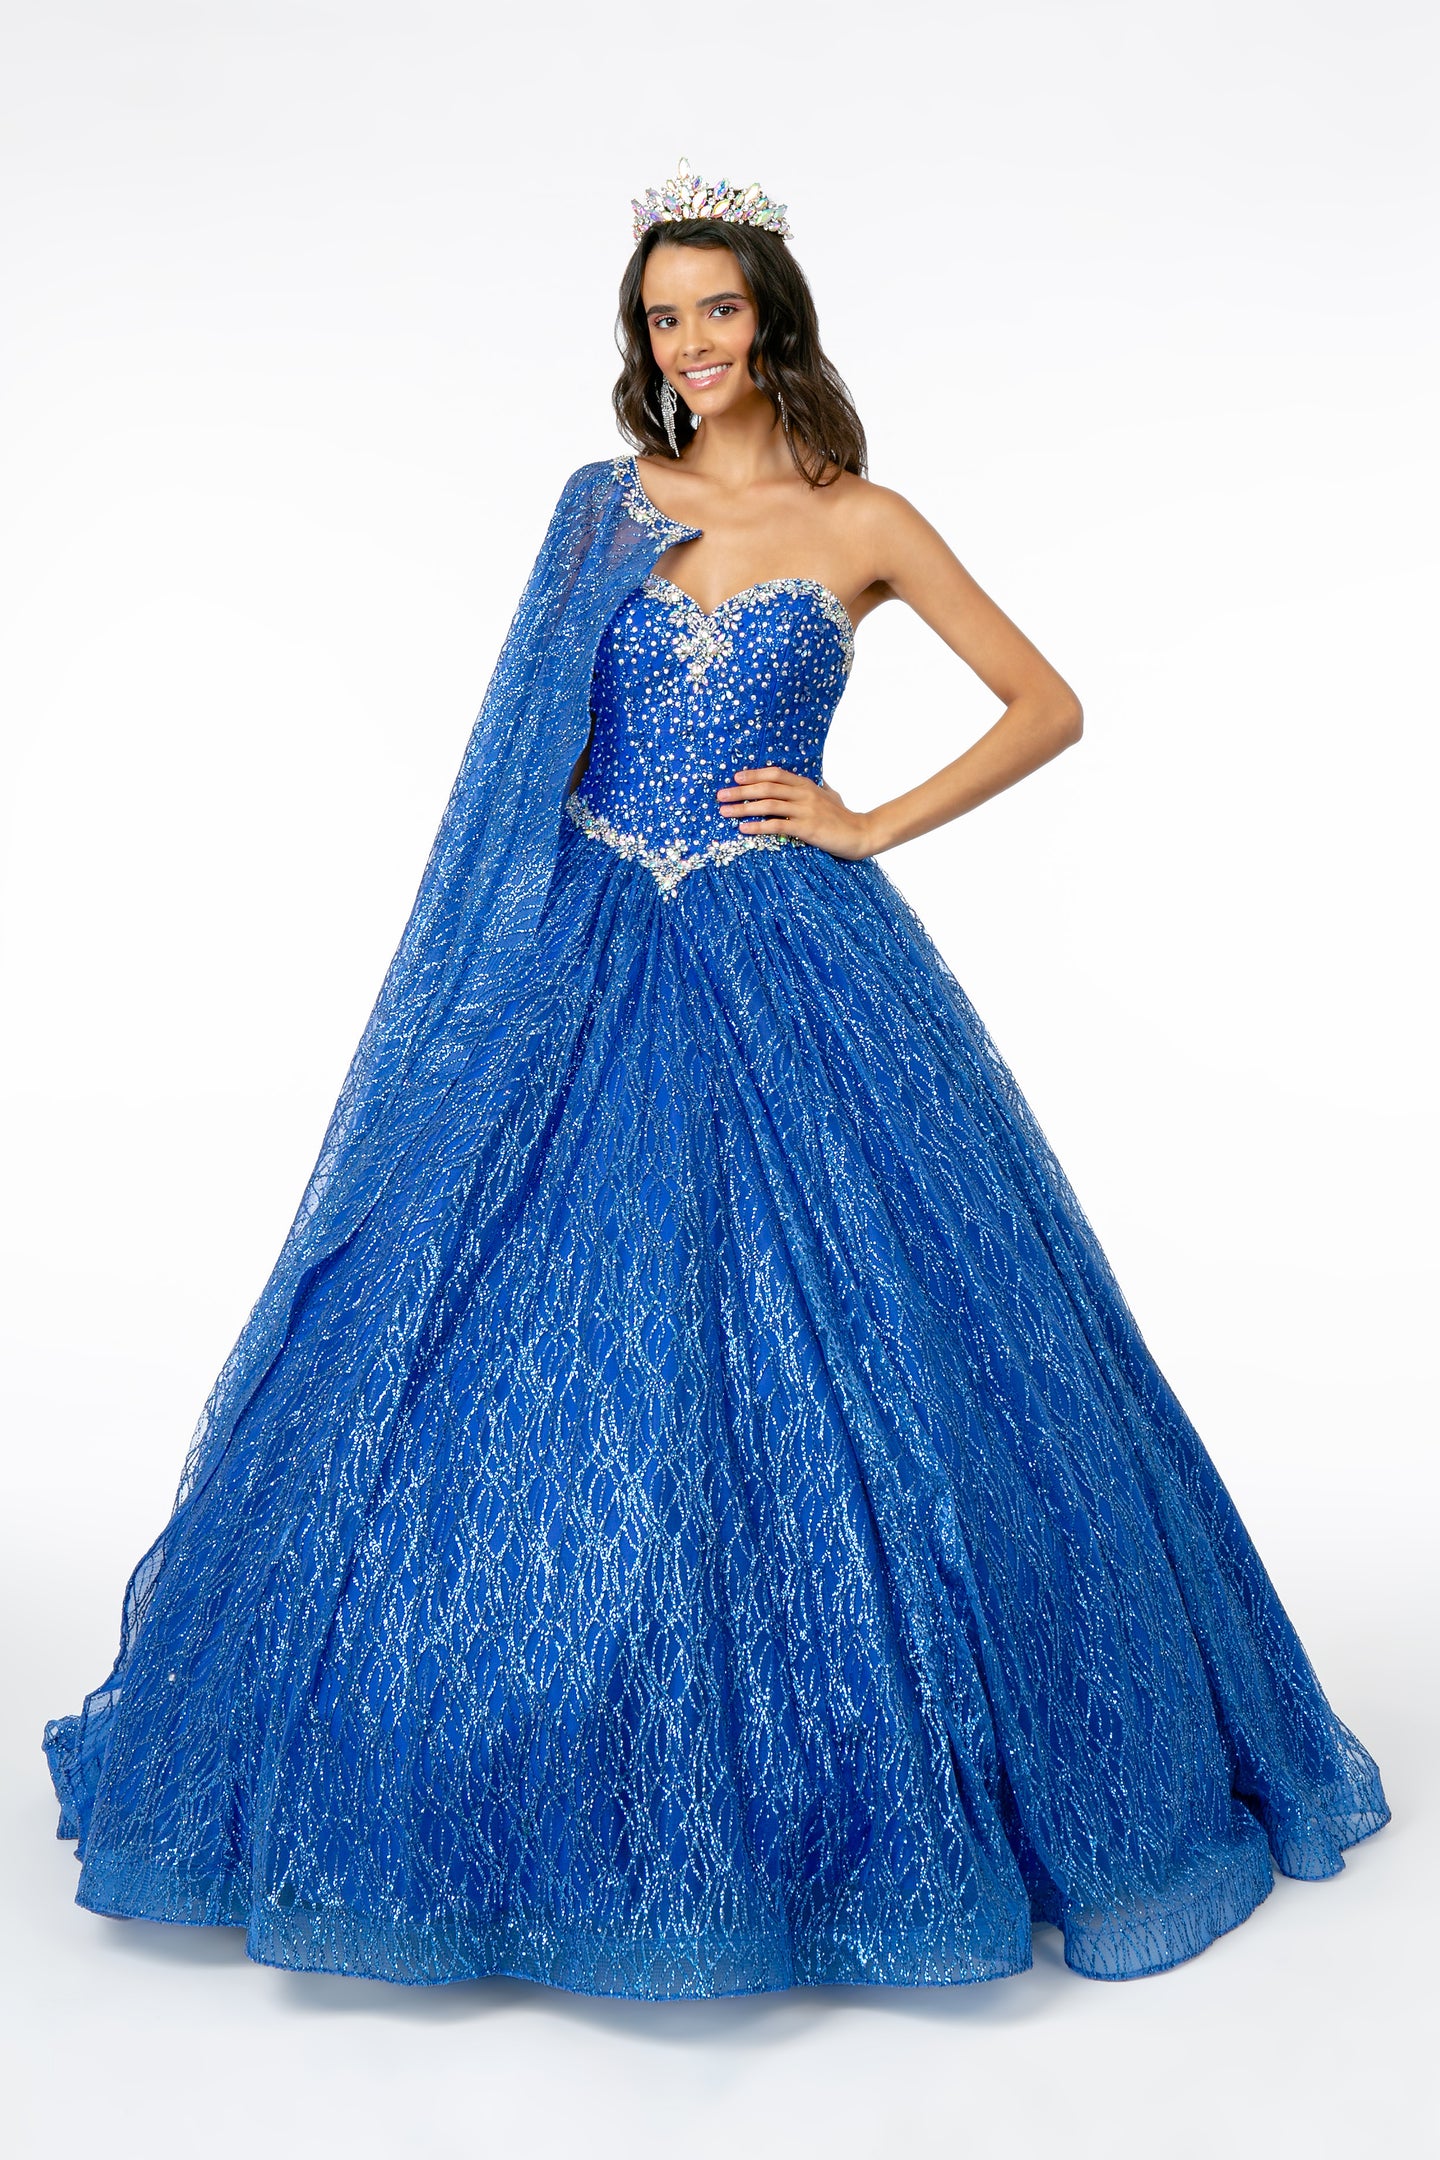 Quince Dress With Cape - LAS2801